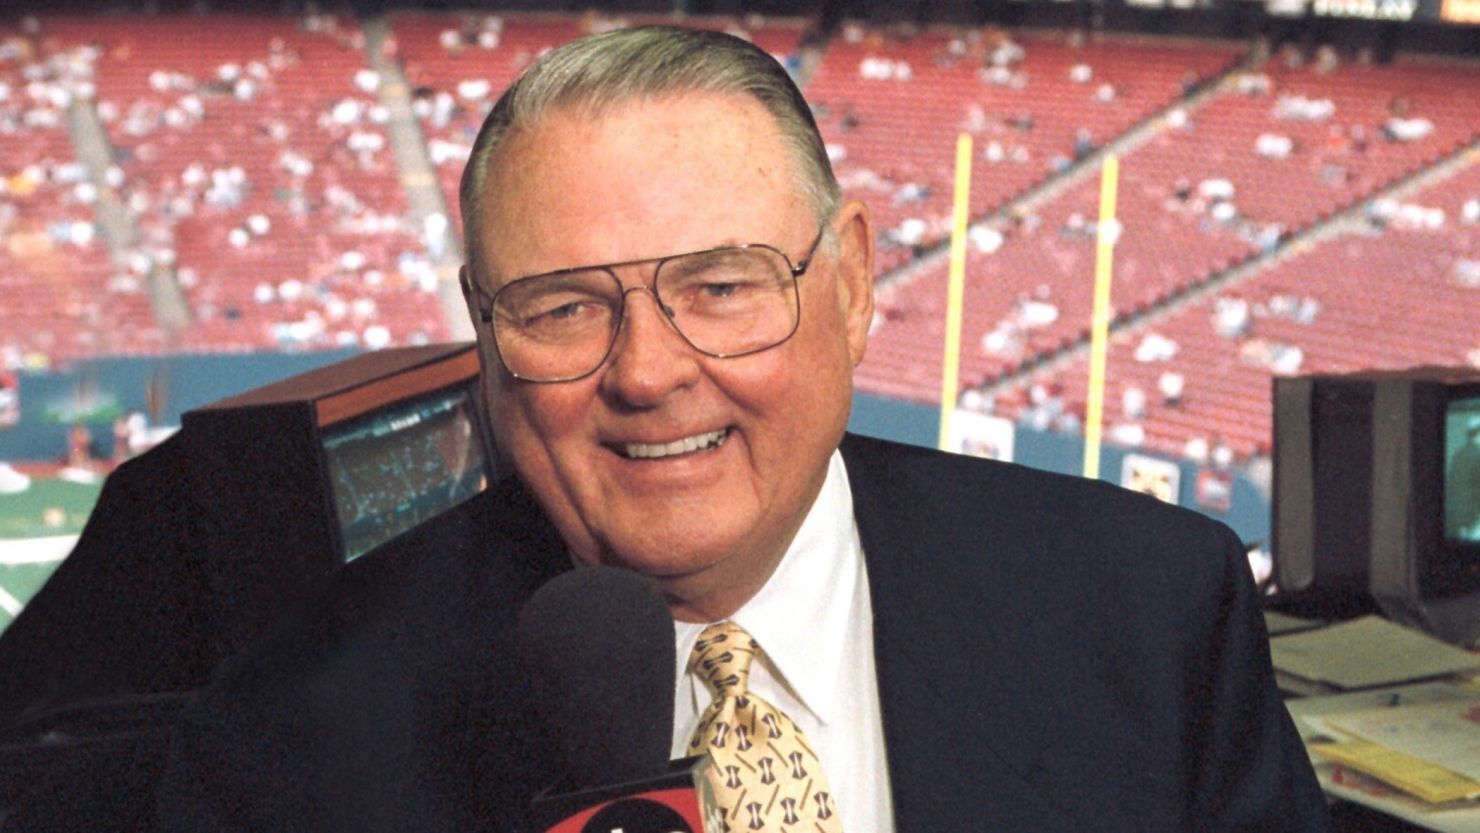 Keith Jackson worked college football games and other sports for ABC for more than 40 years before his retirement in 2006.